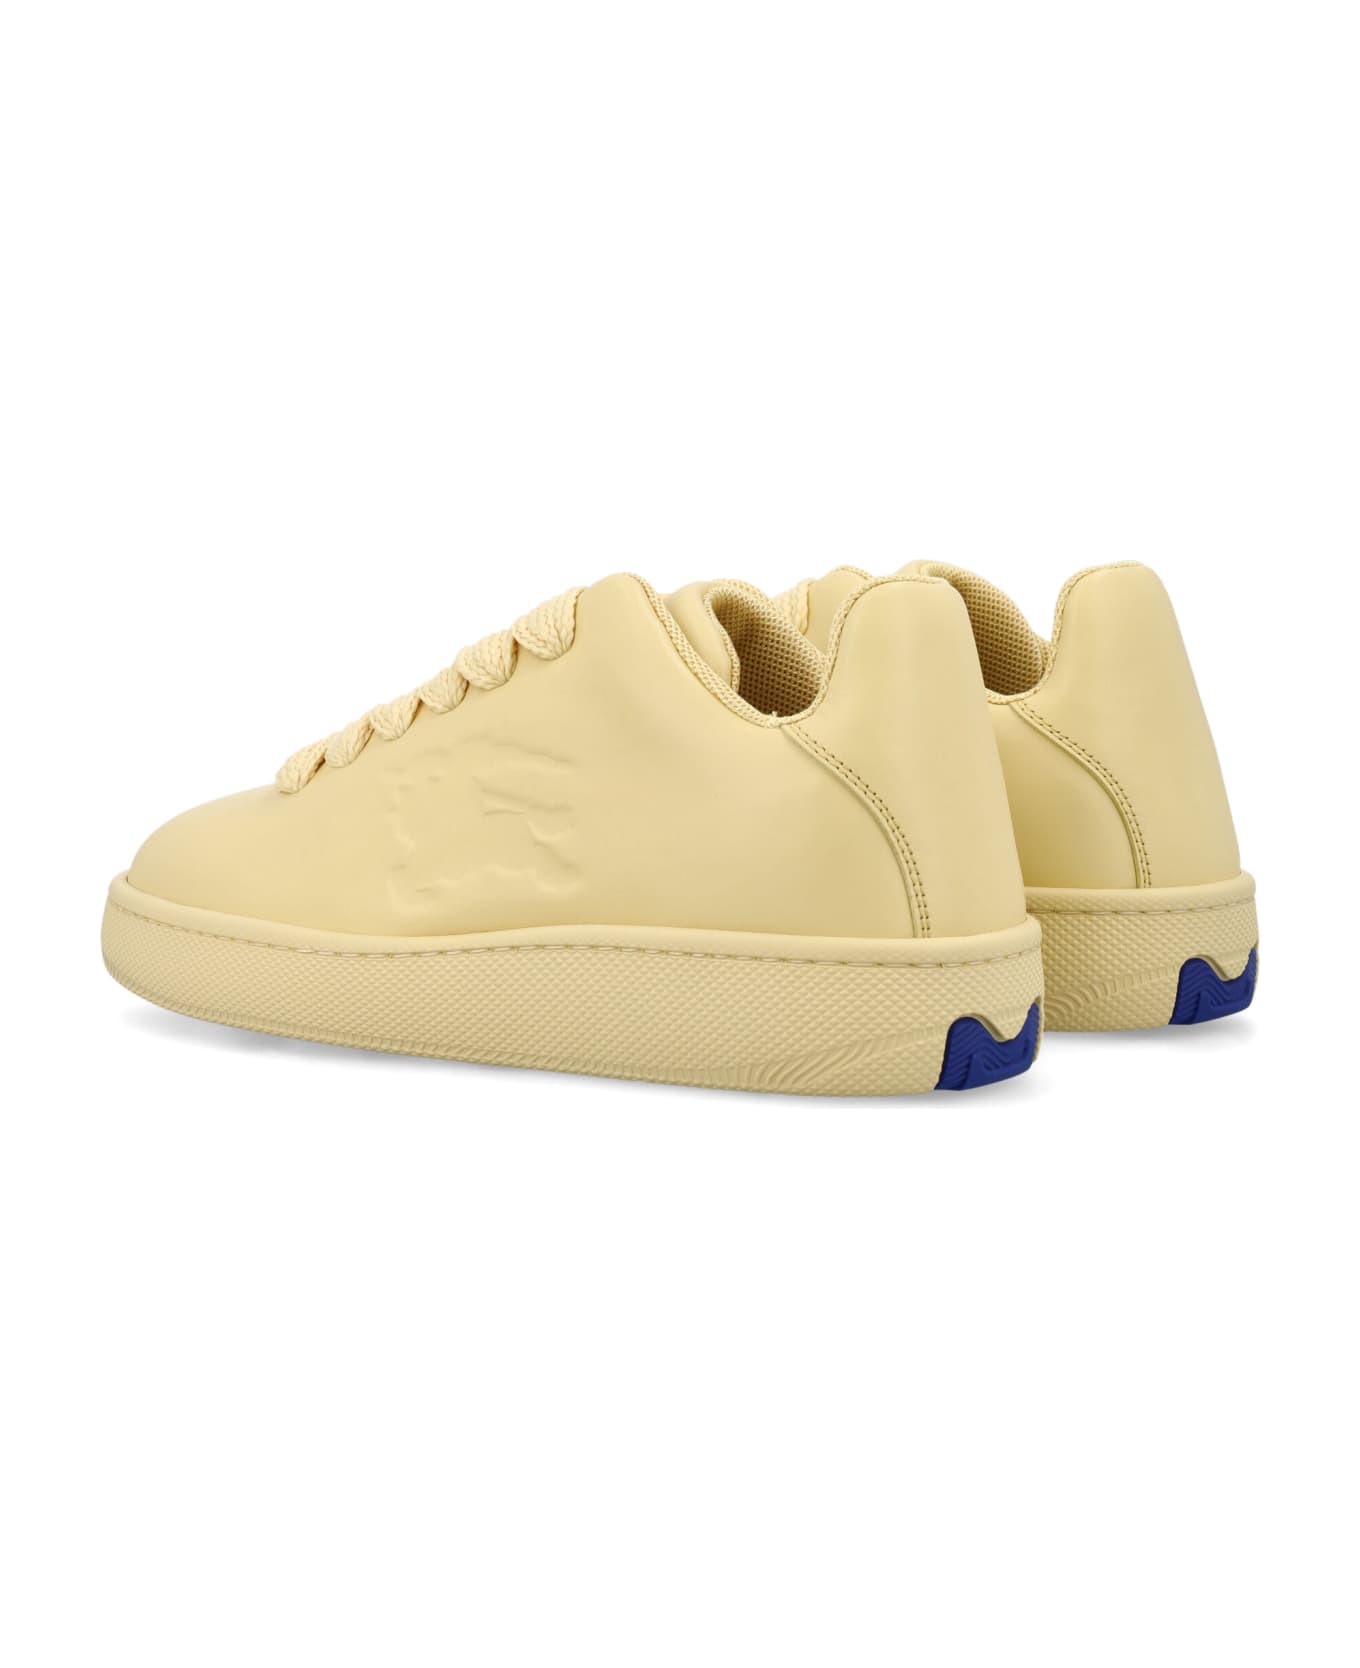 Burberry London Leather Box Sneakers - DAFFODIL スニーカー